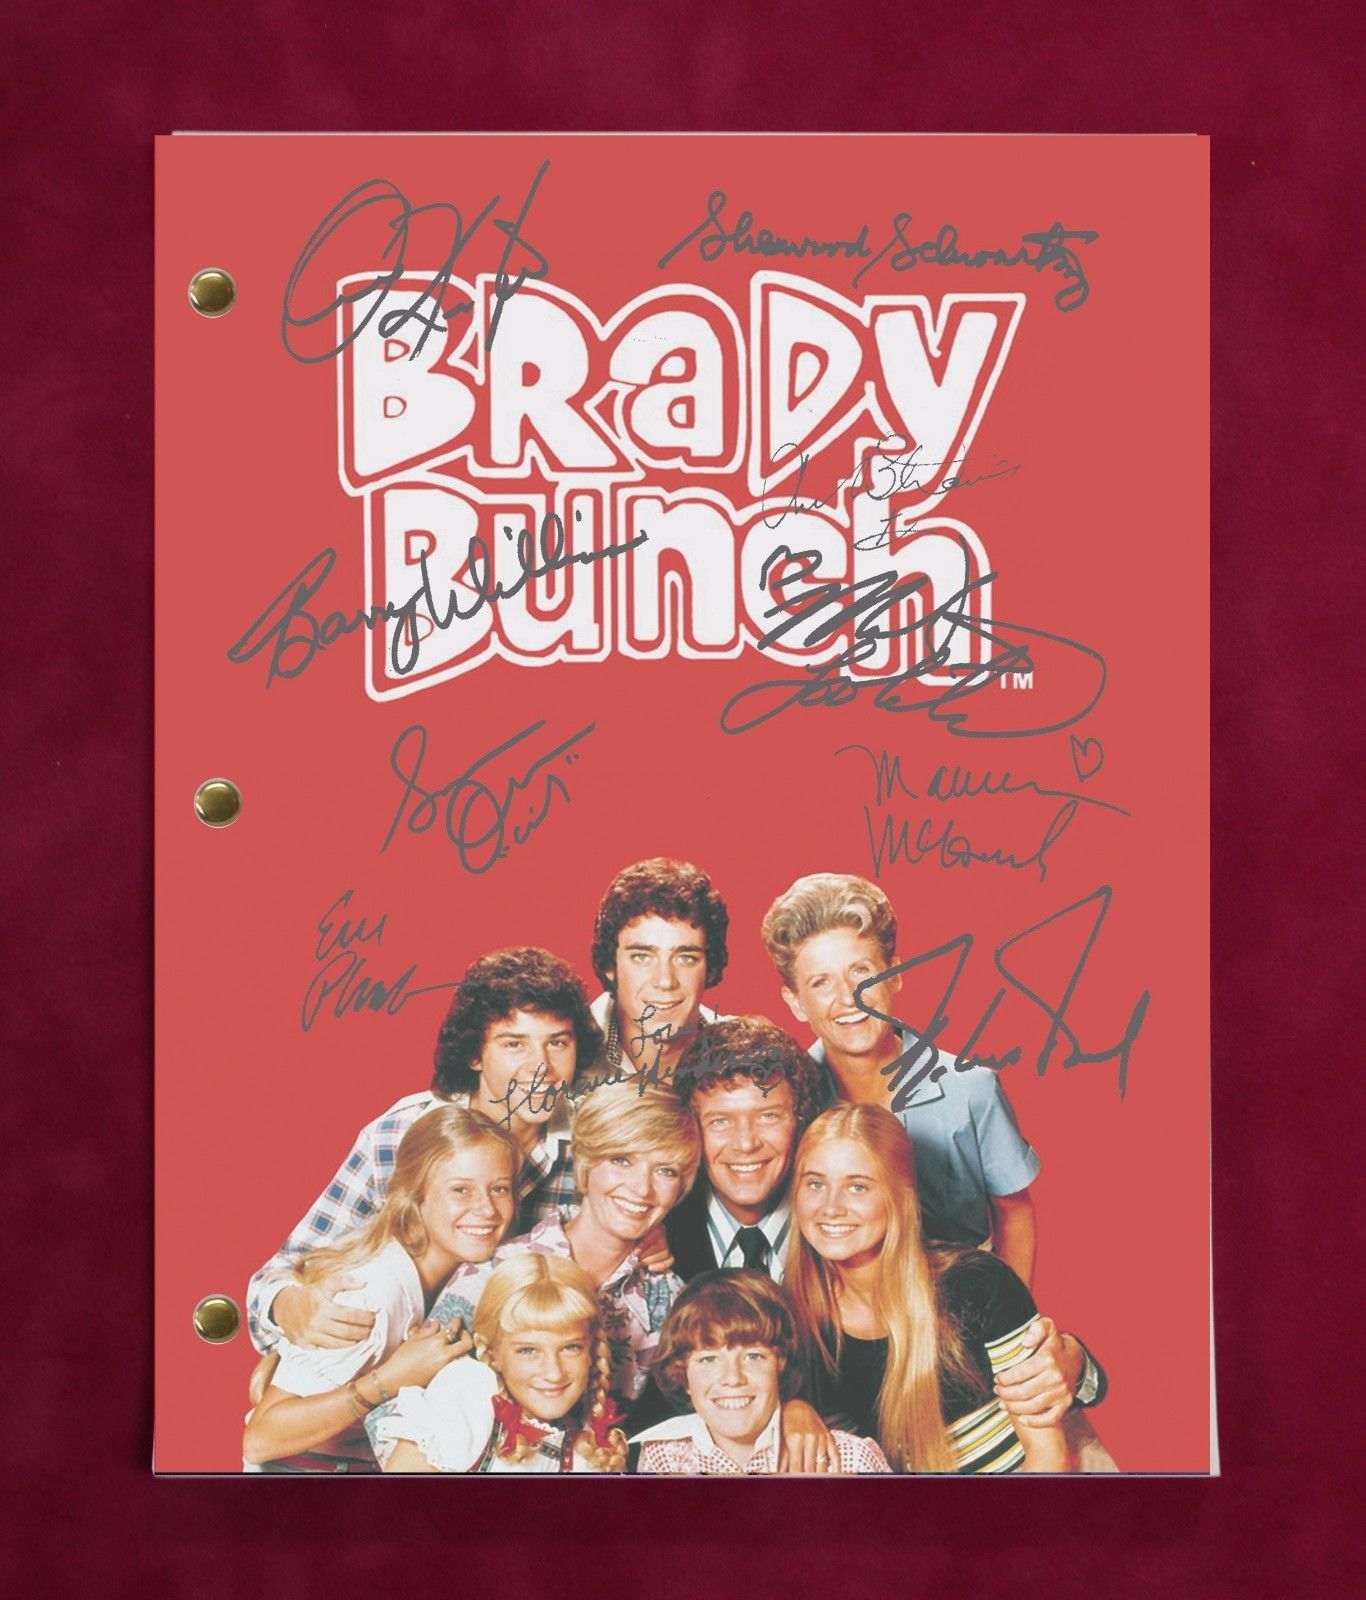 brady bunch complete discography torrents